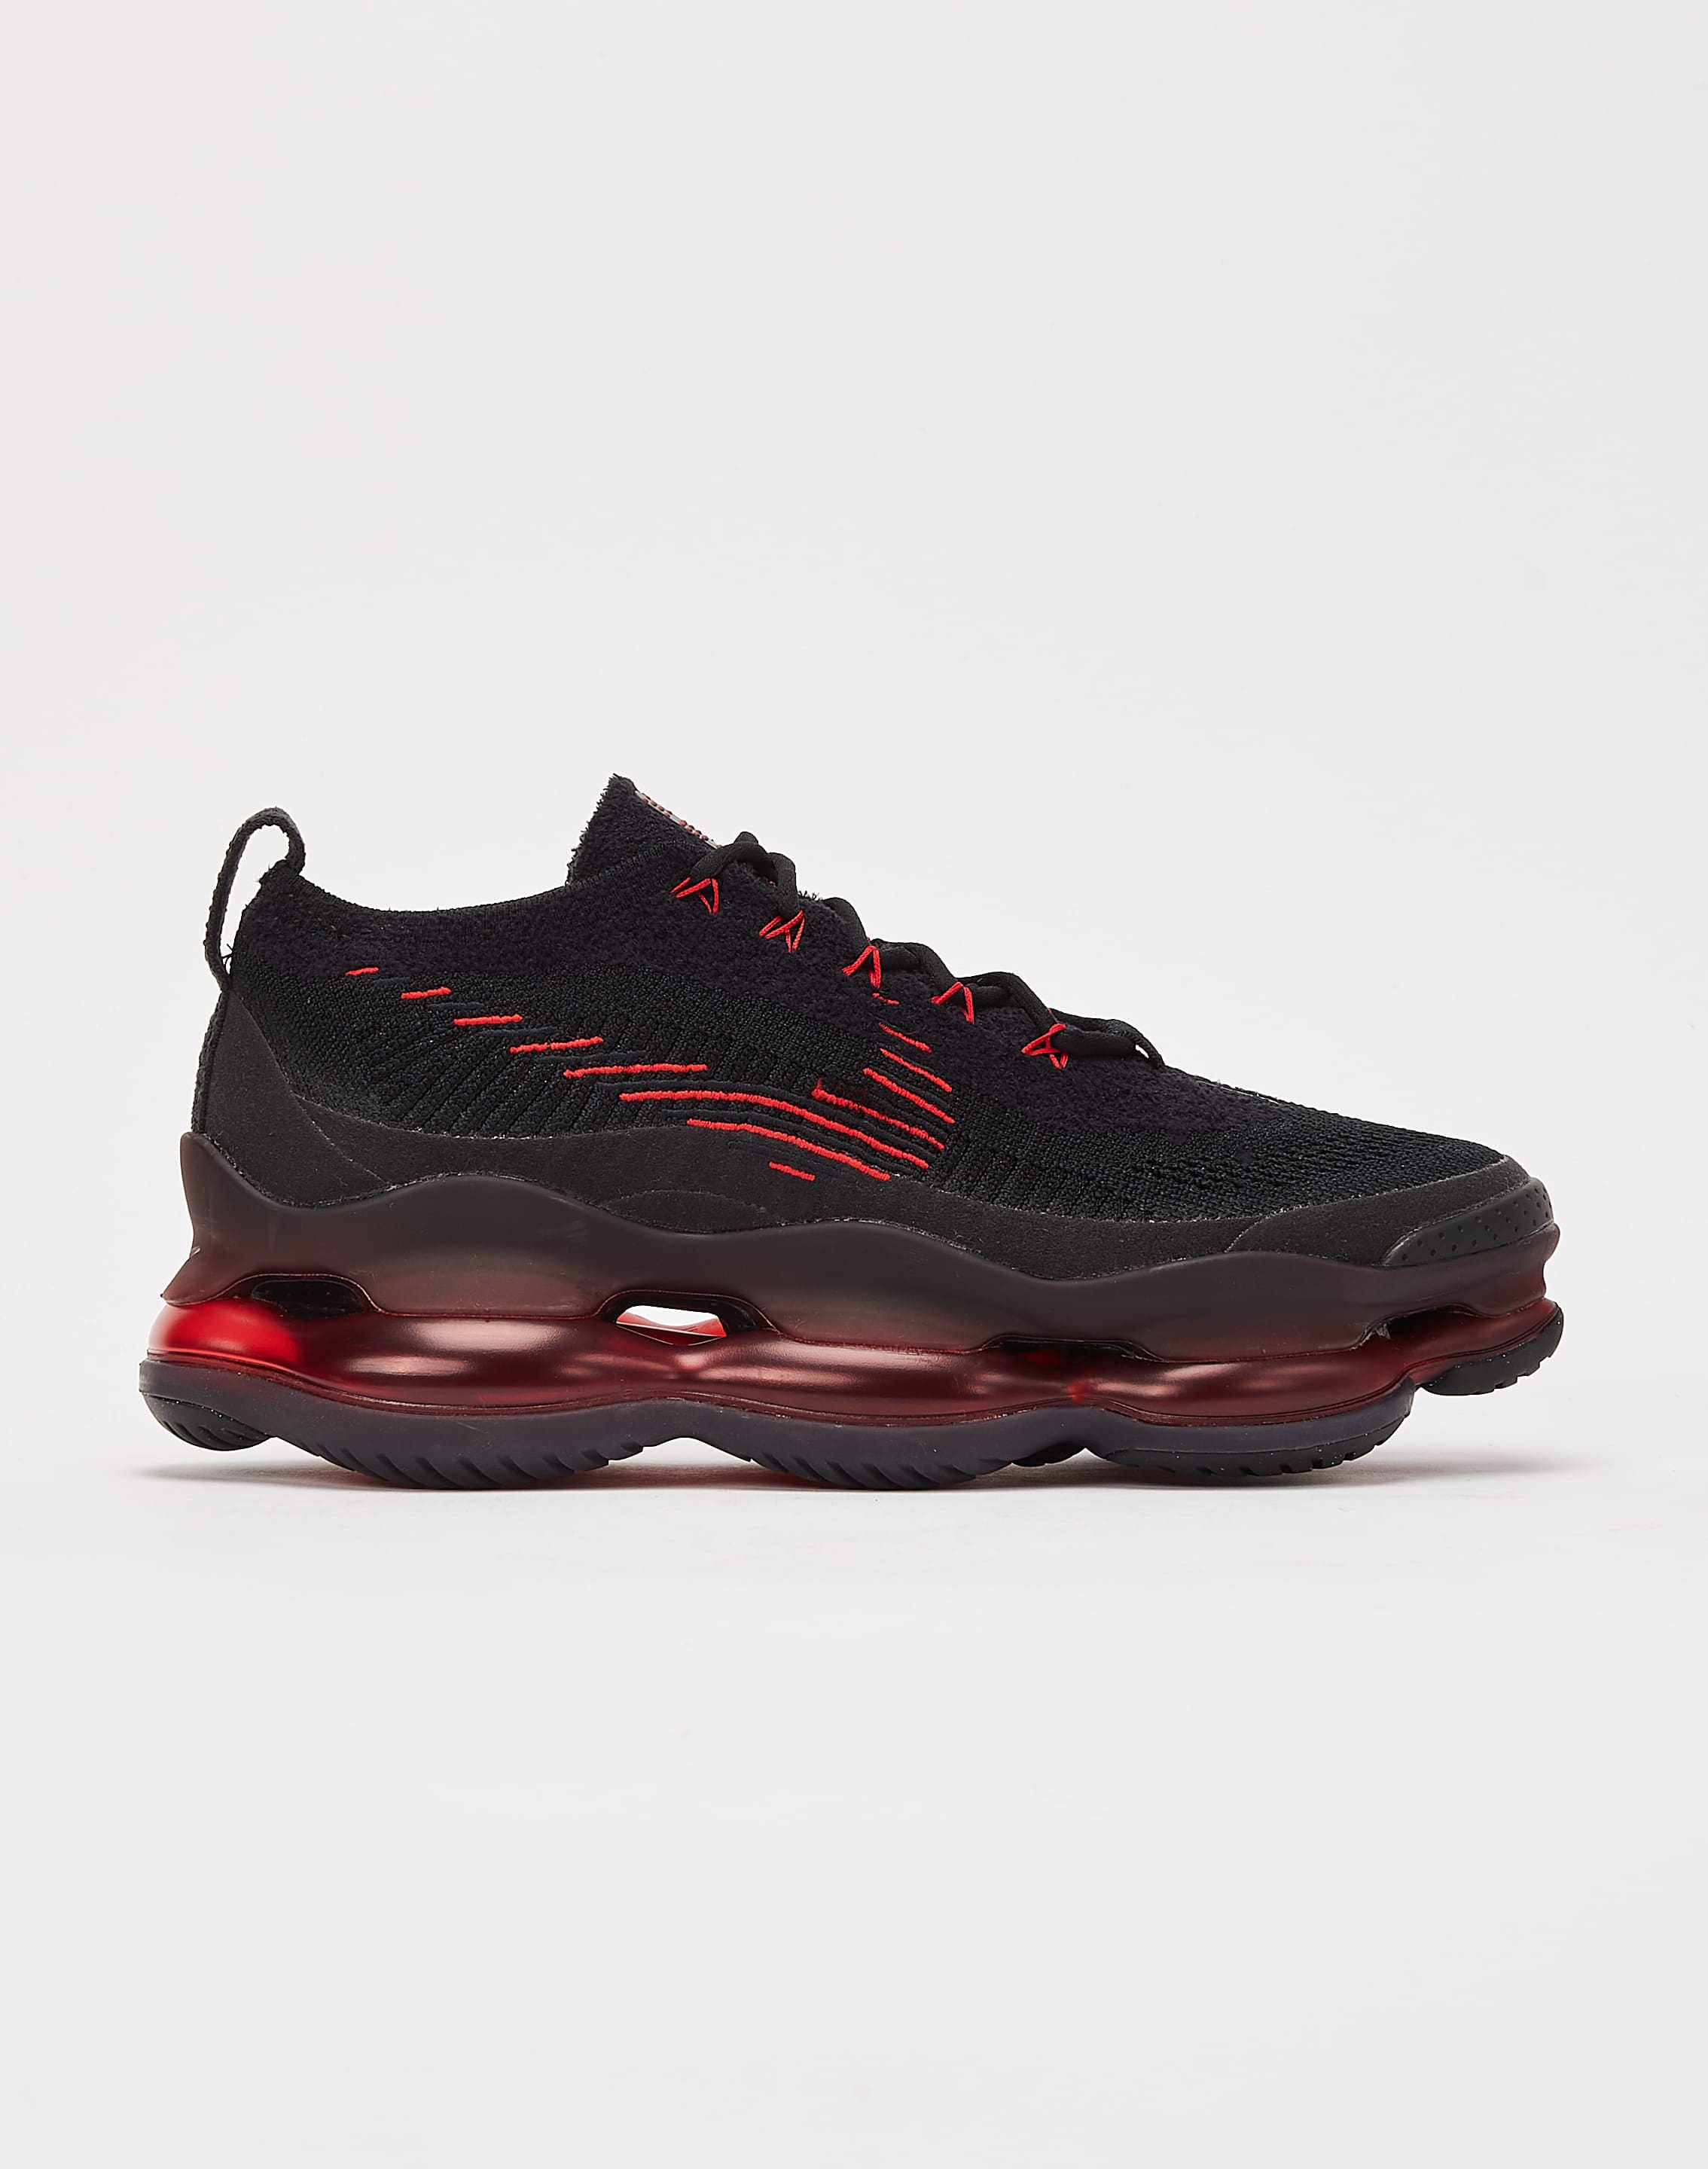 Nike Air Max Scorpion Flyknit  - Black,Red - Size: 10.5